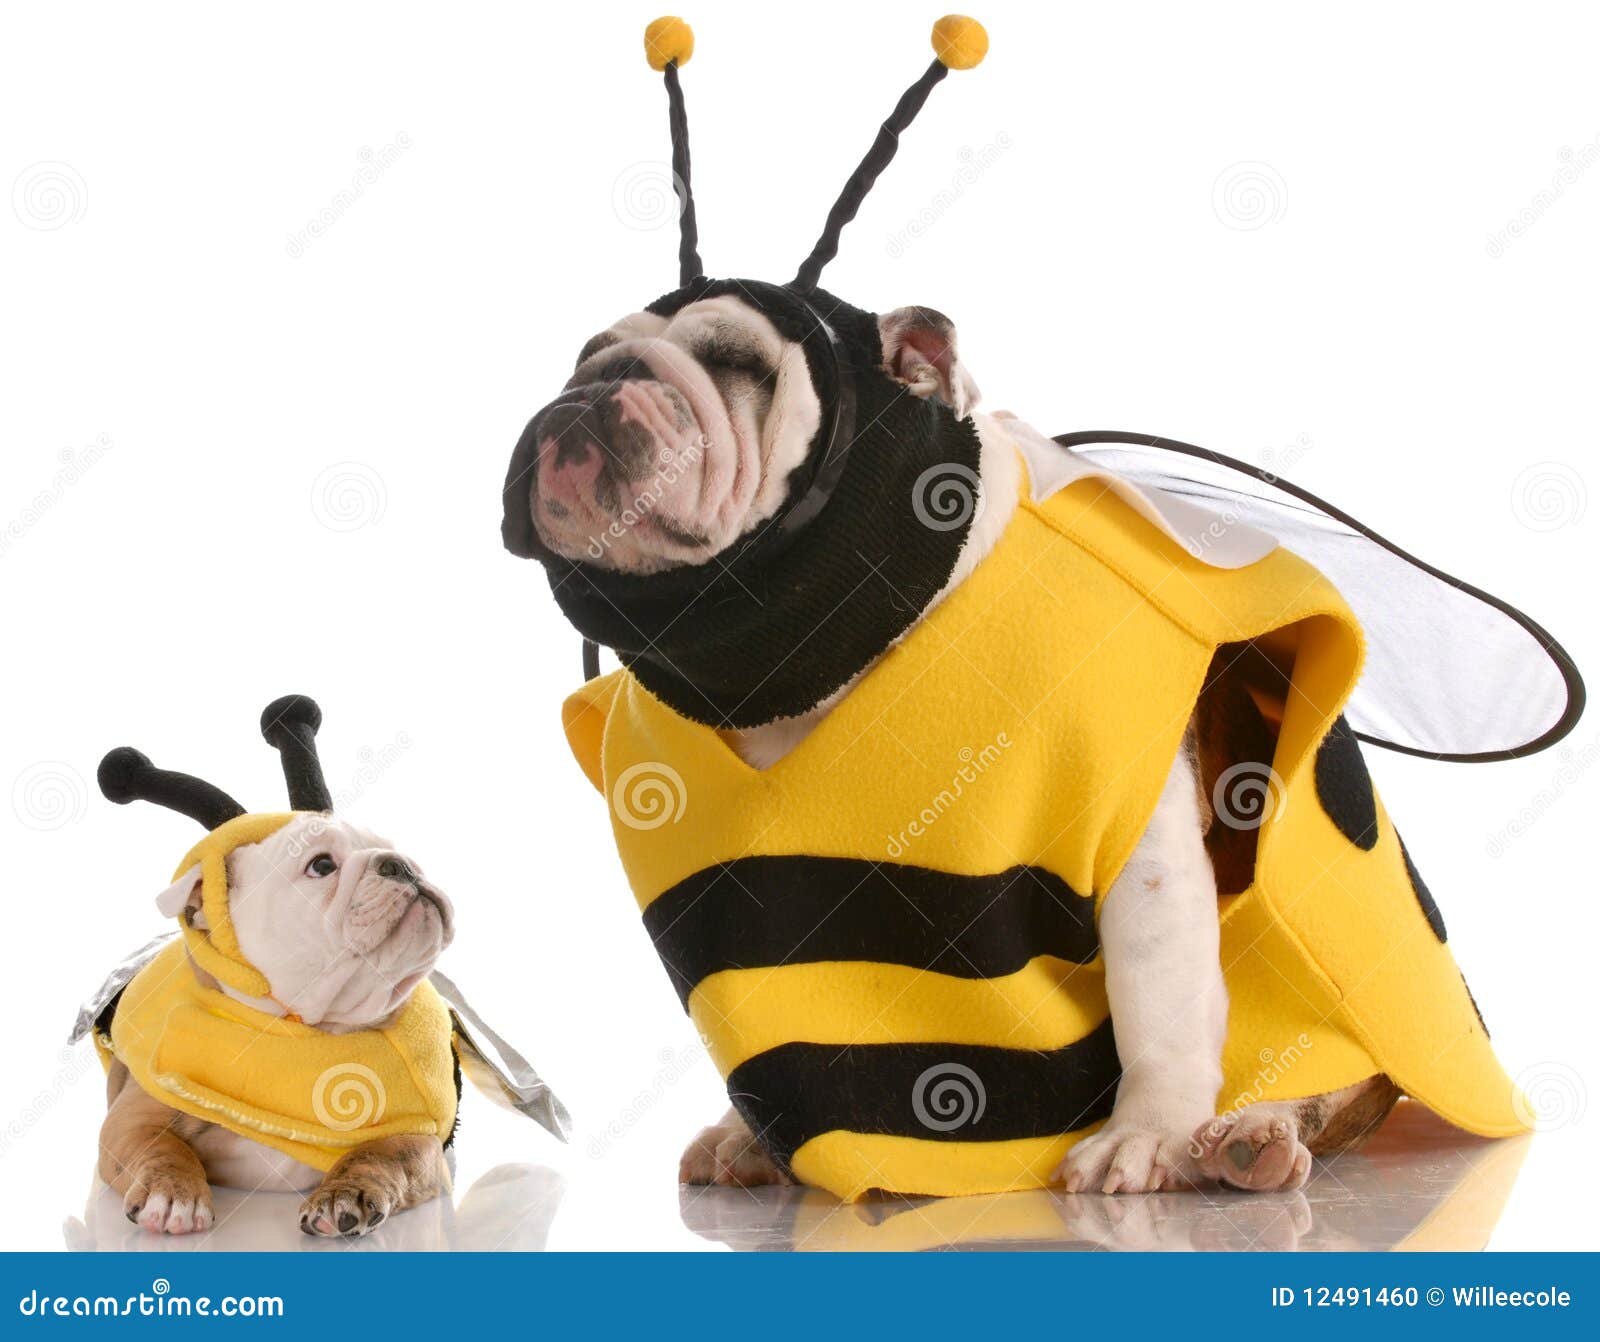 dog-dressed-up-as-matching-bees-12491460.jpg